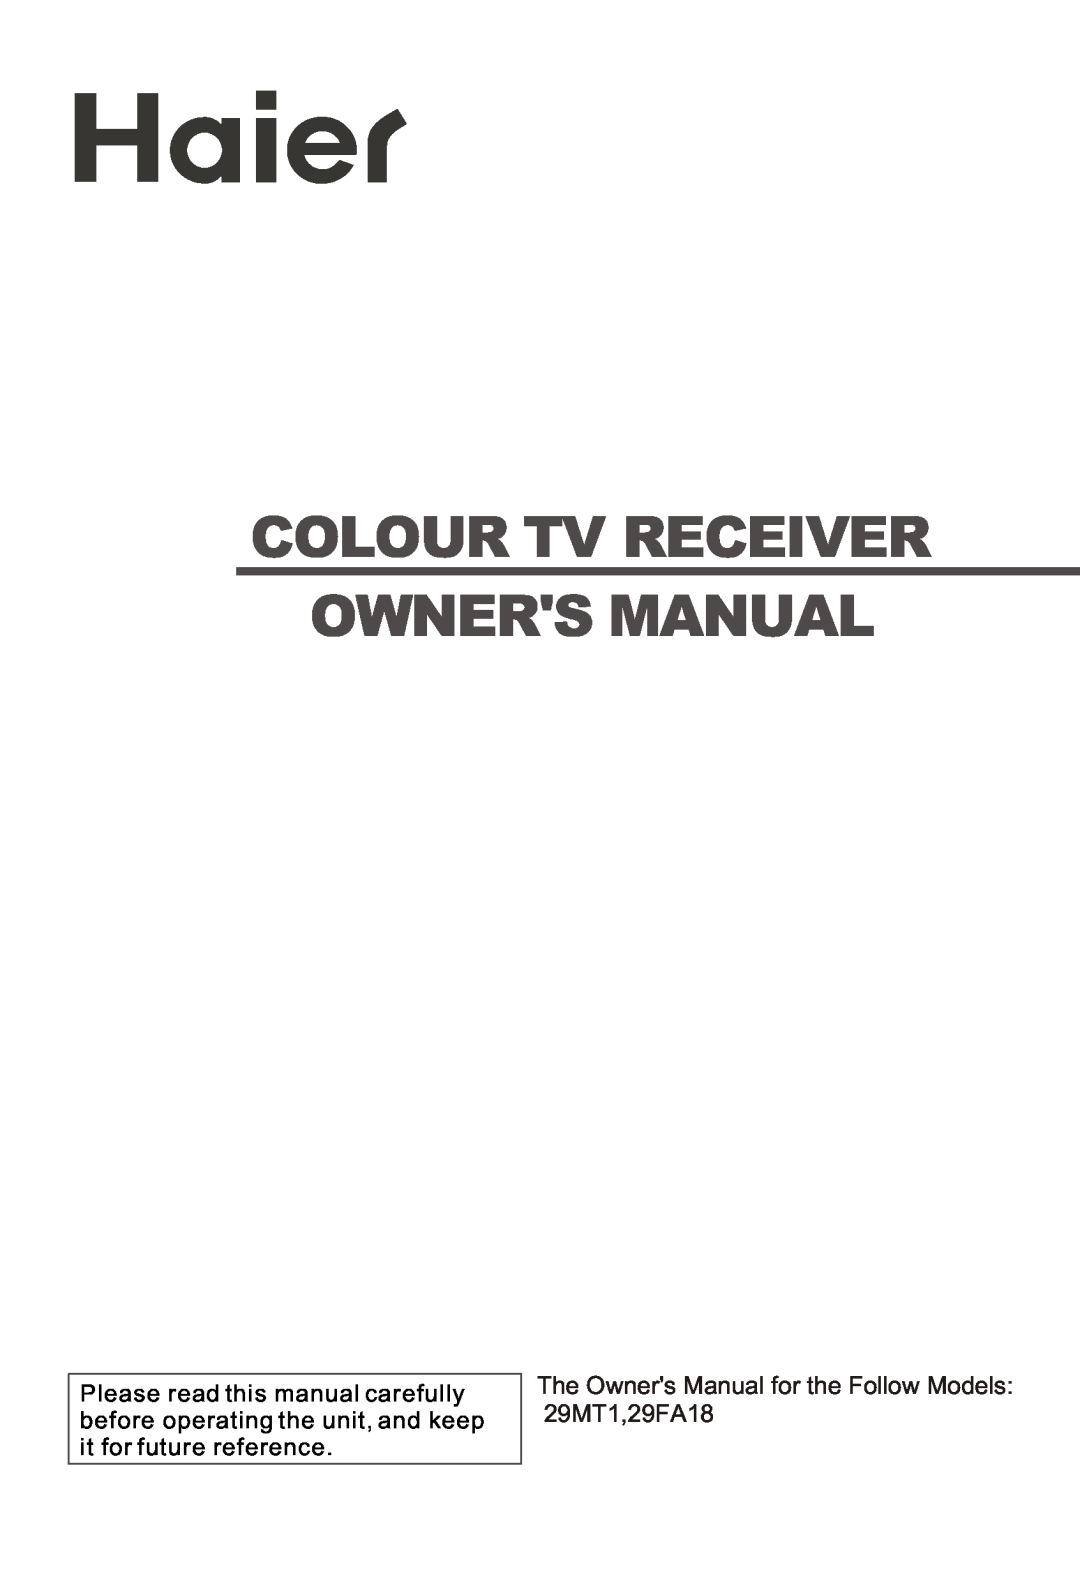 Haier owner manual Colour Tv Receiver Owners Manual, The Owners Manual for the Follow Models 29MT1,29FA18 